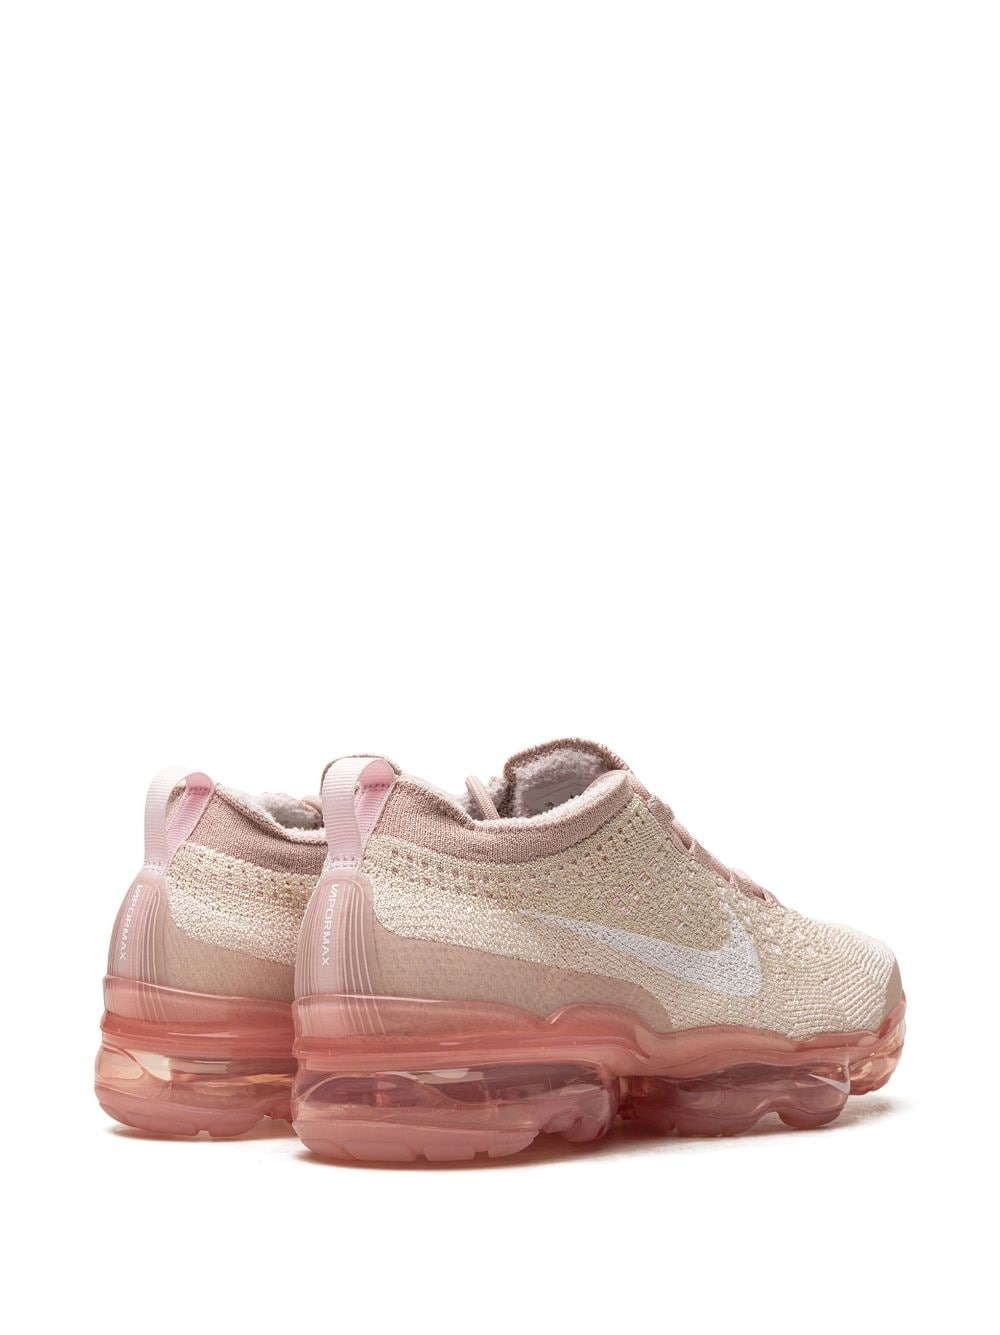 Air VaporMax 2023 Flyknit "Oatmeal Pearl Pink" sneakers - 3